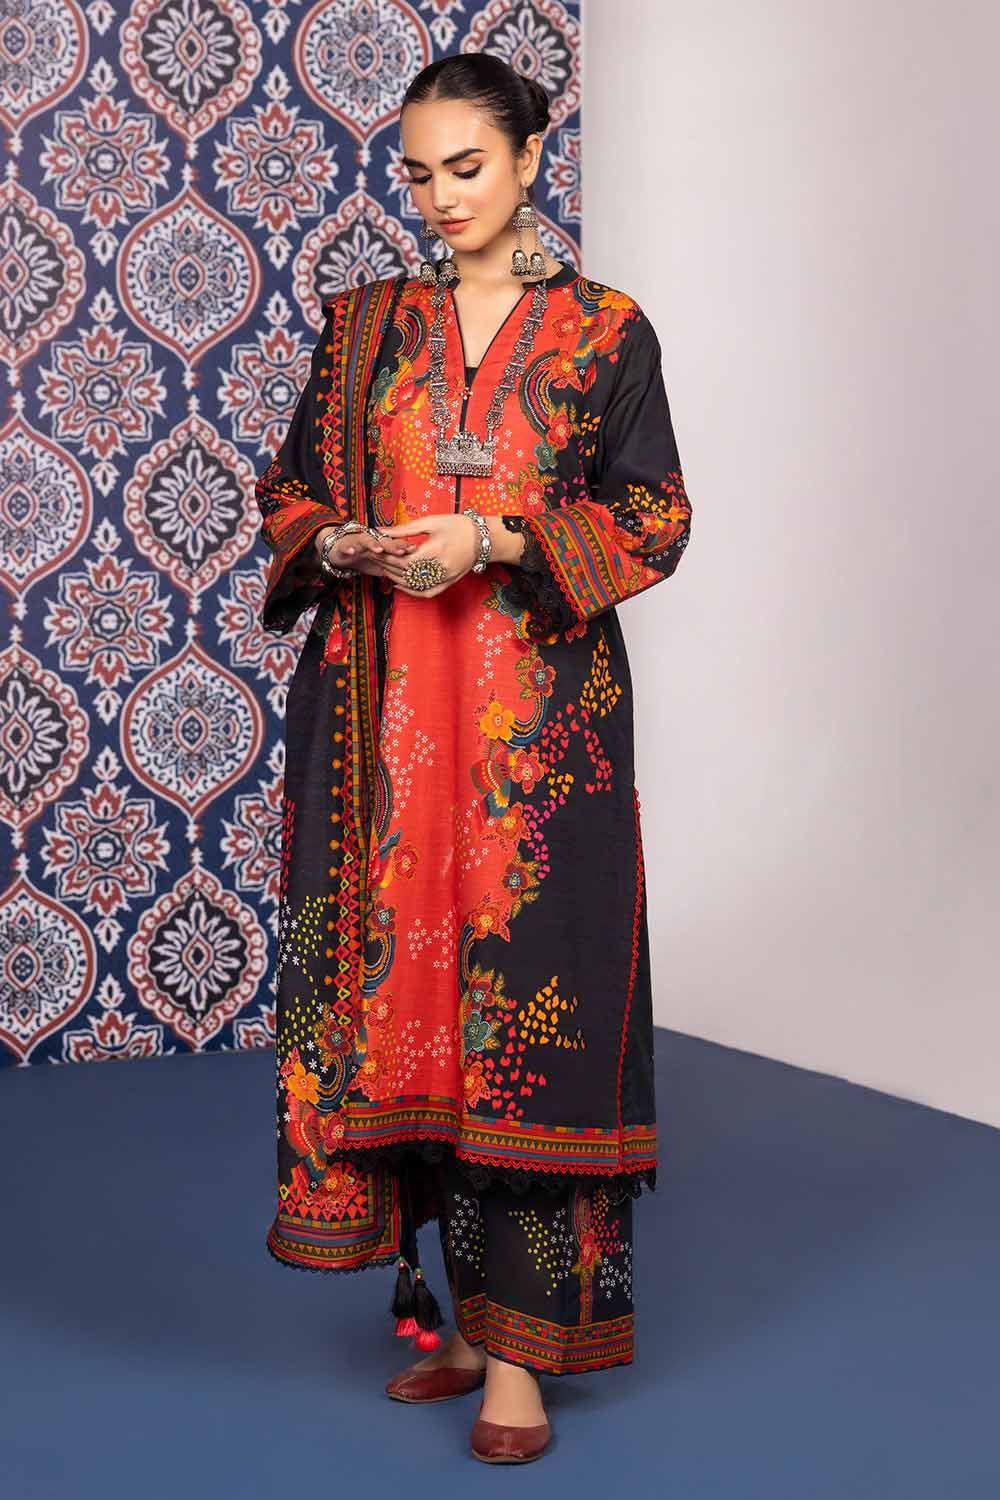 Gul Ahmed 3PC Khaddar Printed Unstitched Suit K-32011